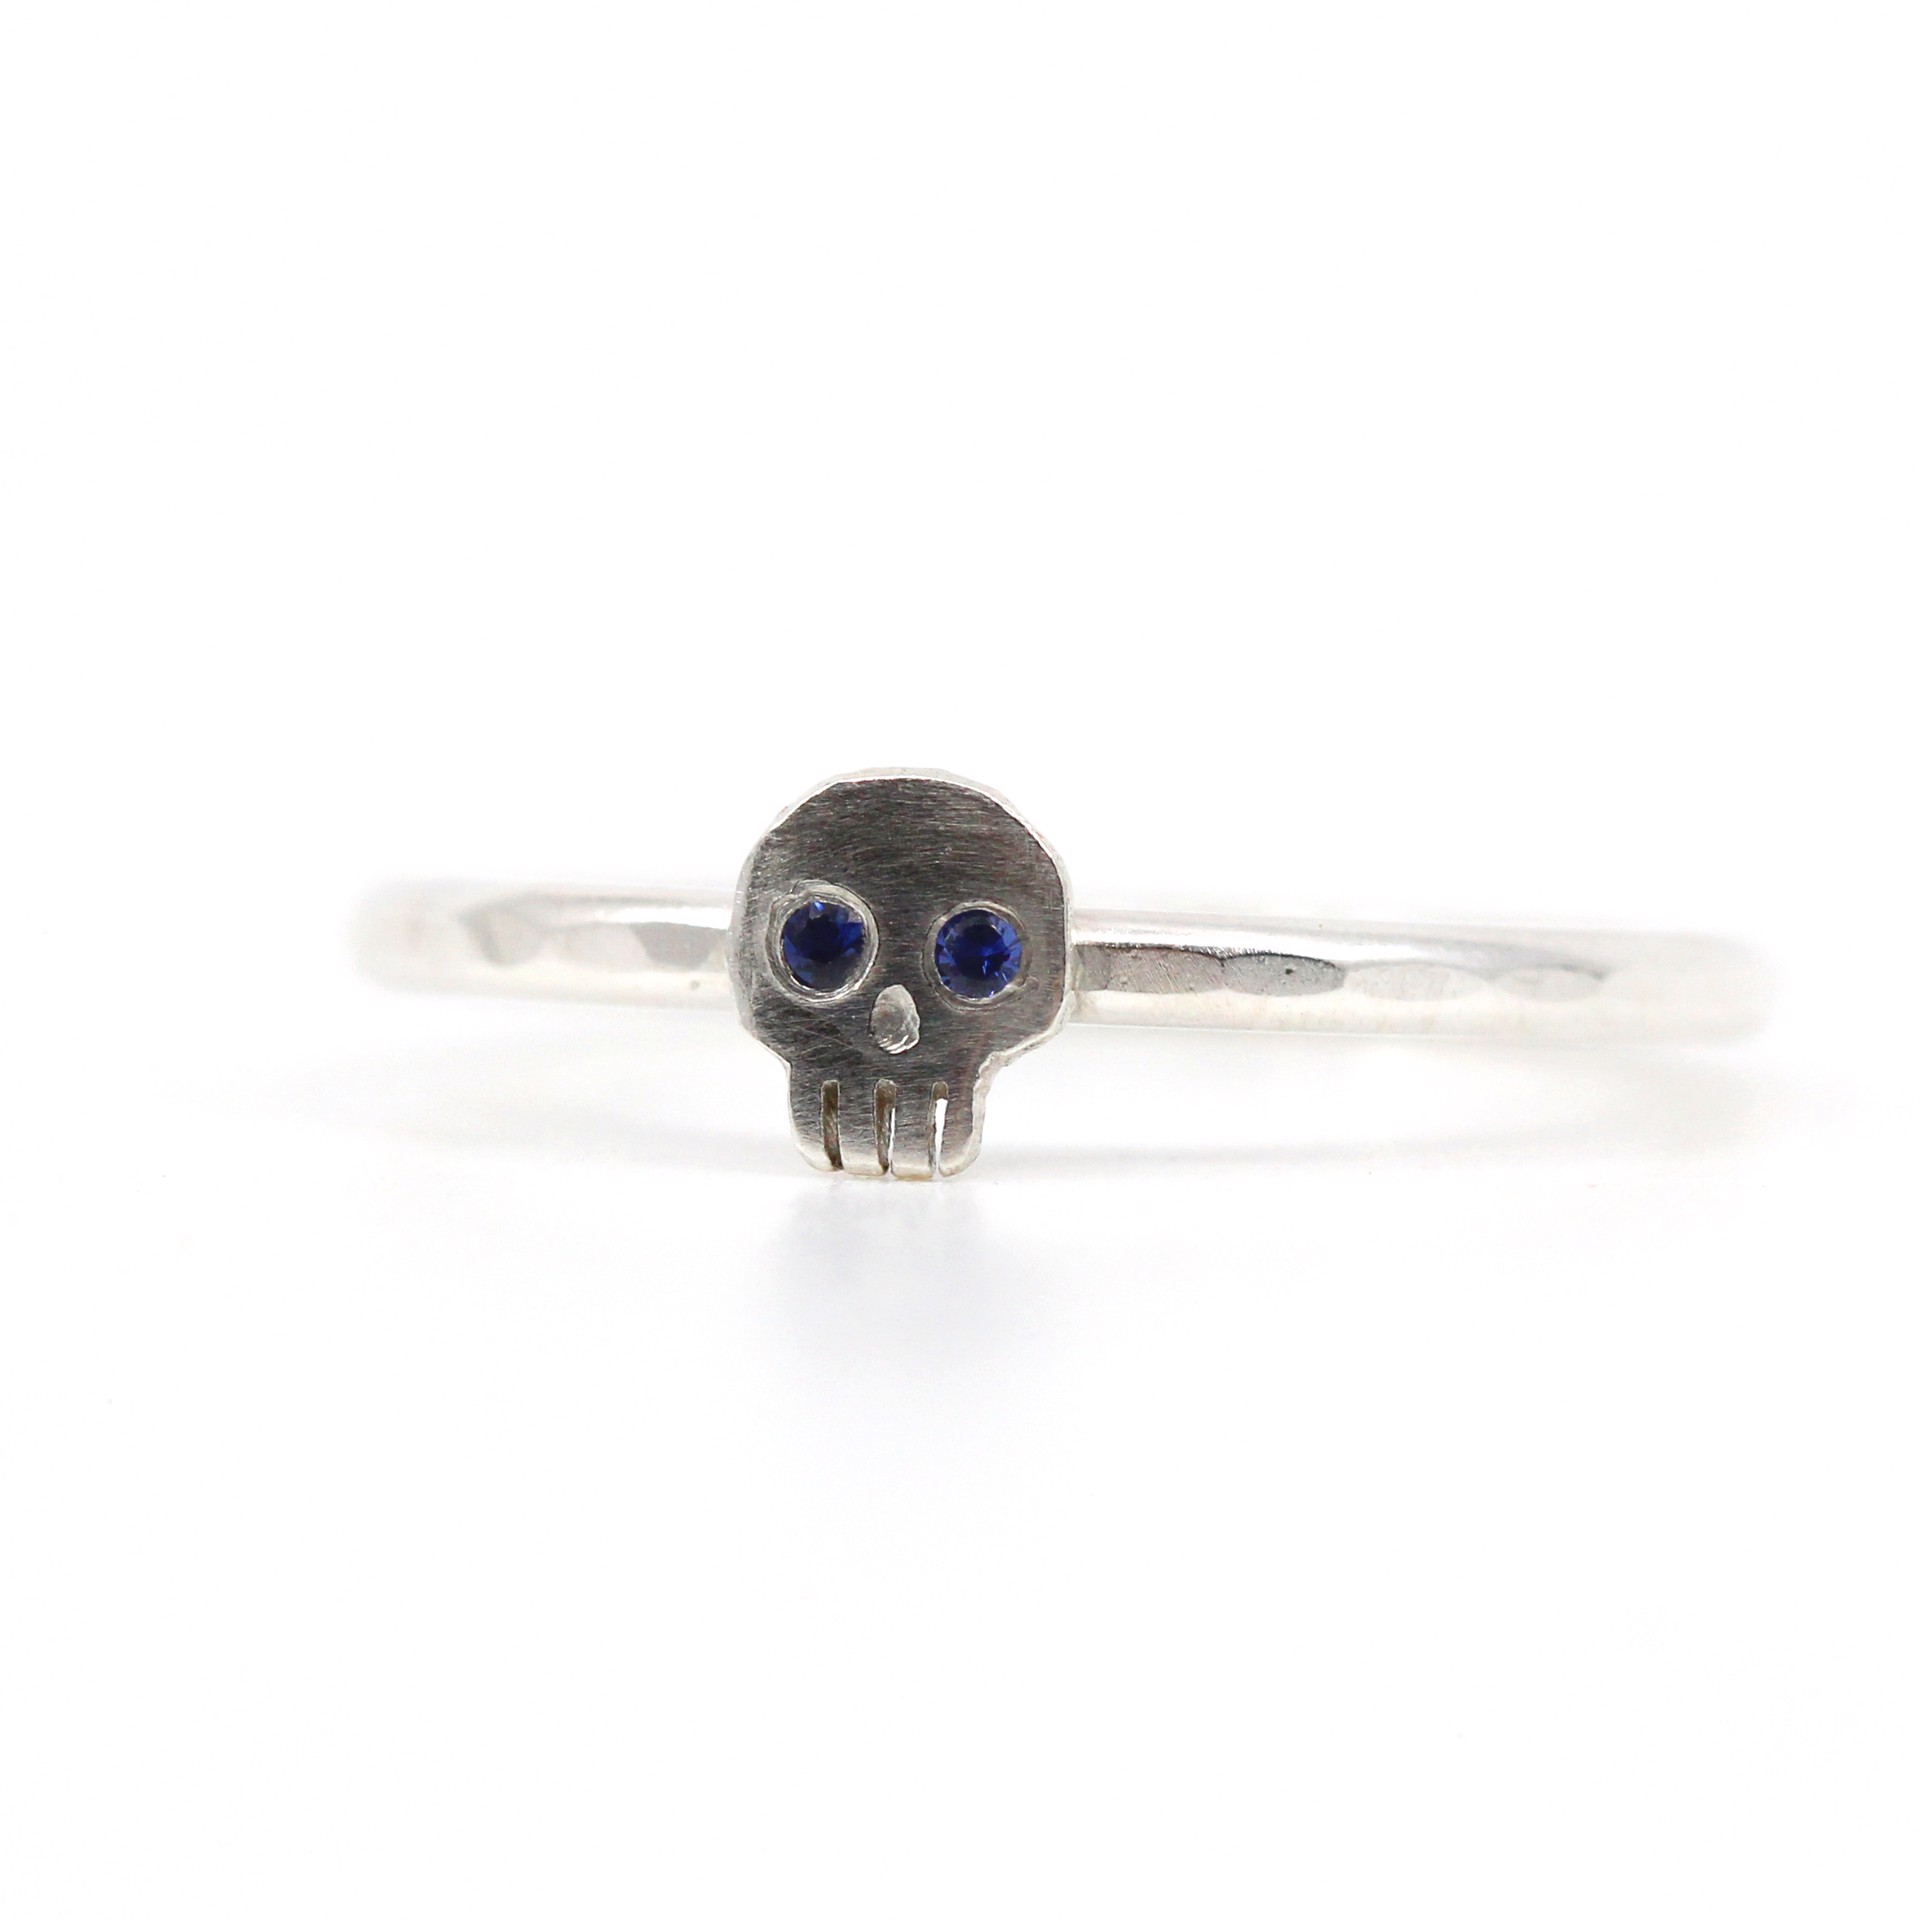 Single Skull Ring (Size 7) by Susan Elnora